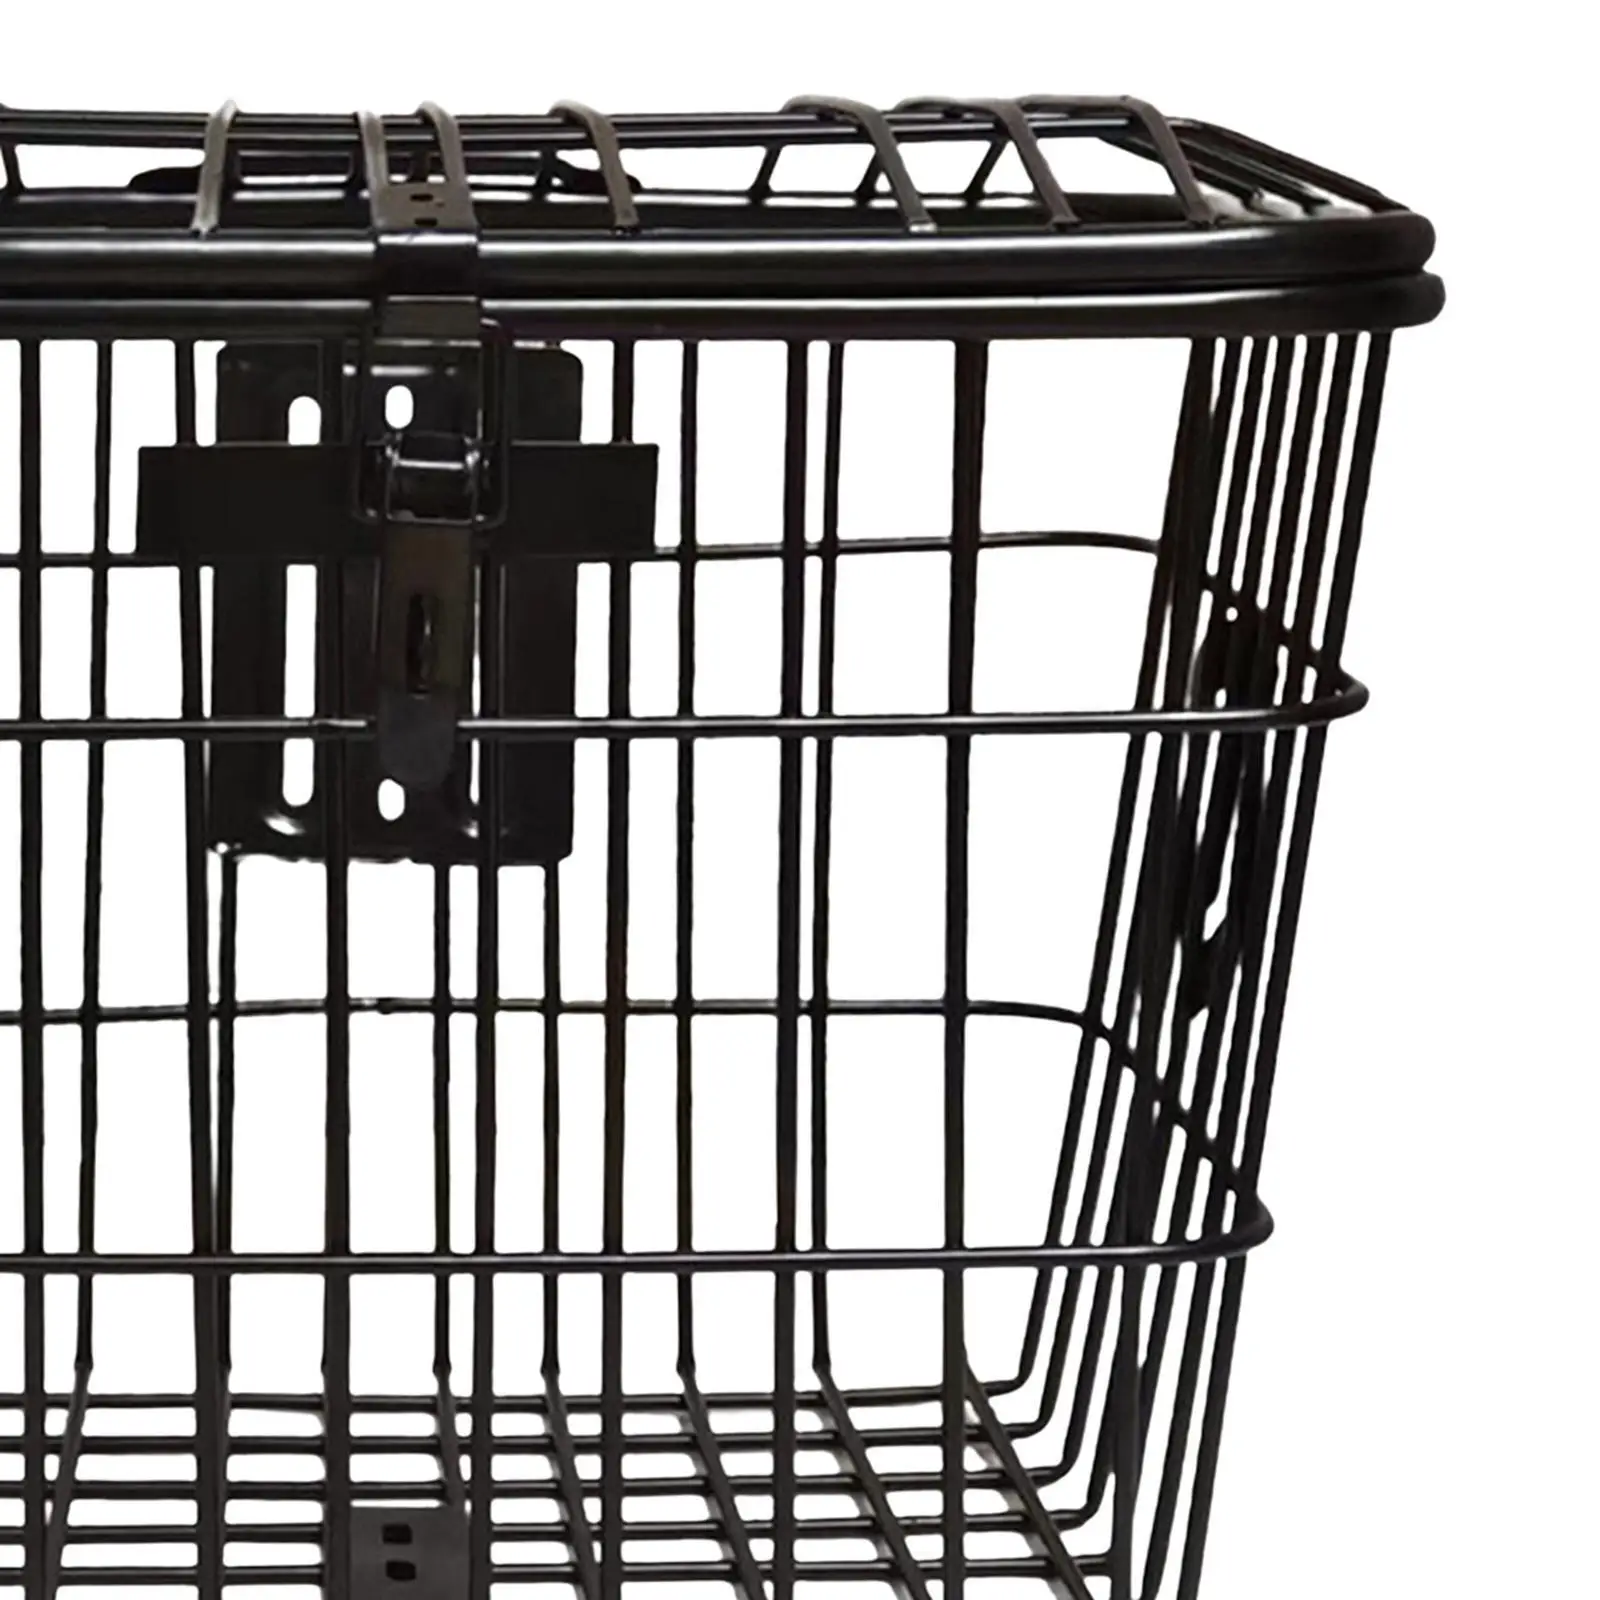 

Metal Bike Basket Organizer with Mounting Screws Large Space for Tricycles